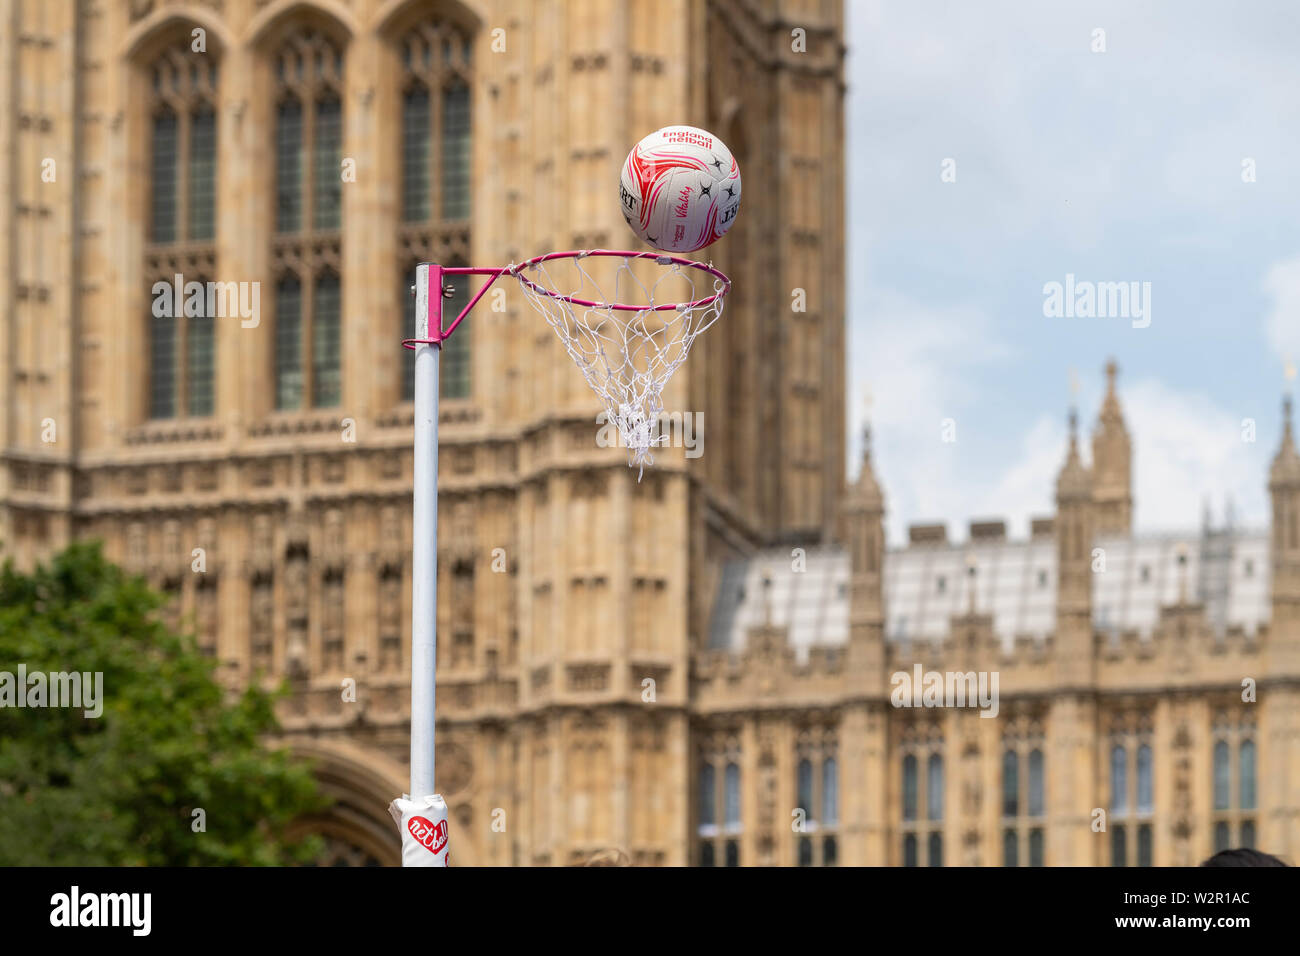 London, UK. 10th July 2019. International Parliamentary Netball competition in Victoria Tower Gardens, played by parliamentary teams representing the UK, New Zealand and Australia. Organised by Netball England ahead of the international netball competition. Credit: Ian Davidson/Alamy Live News Stock Photo